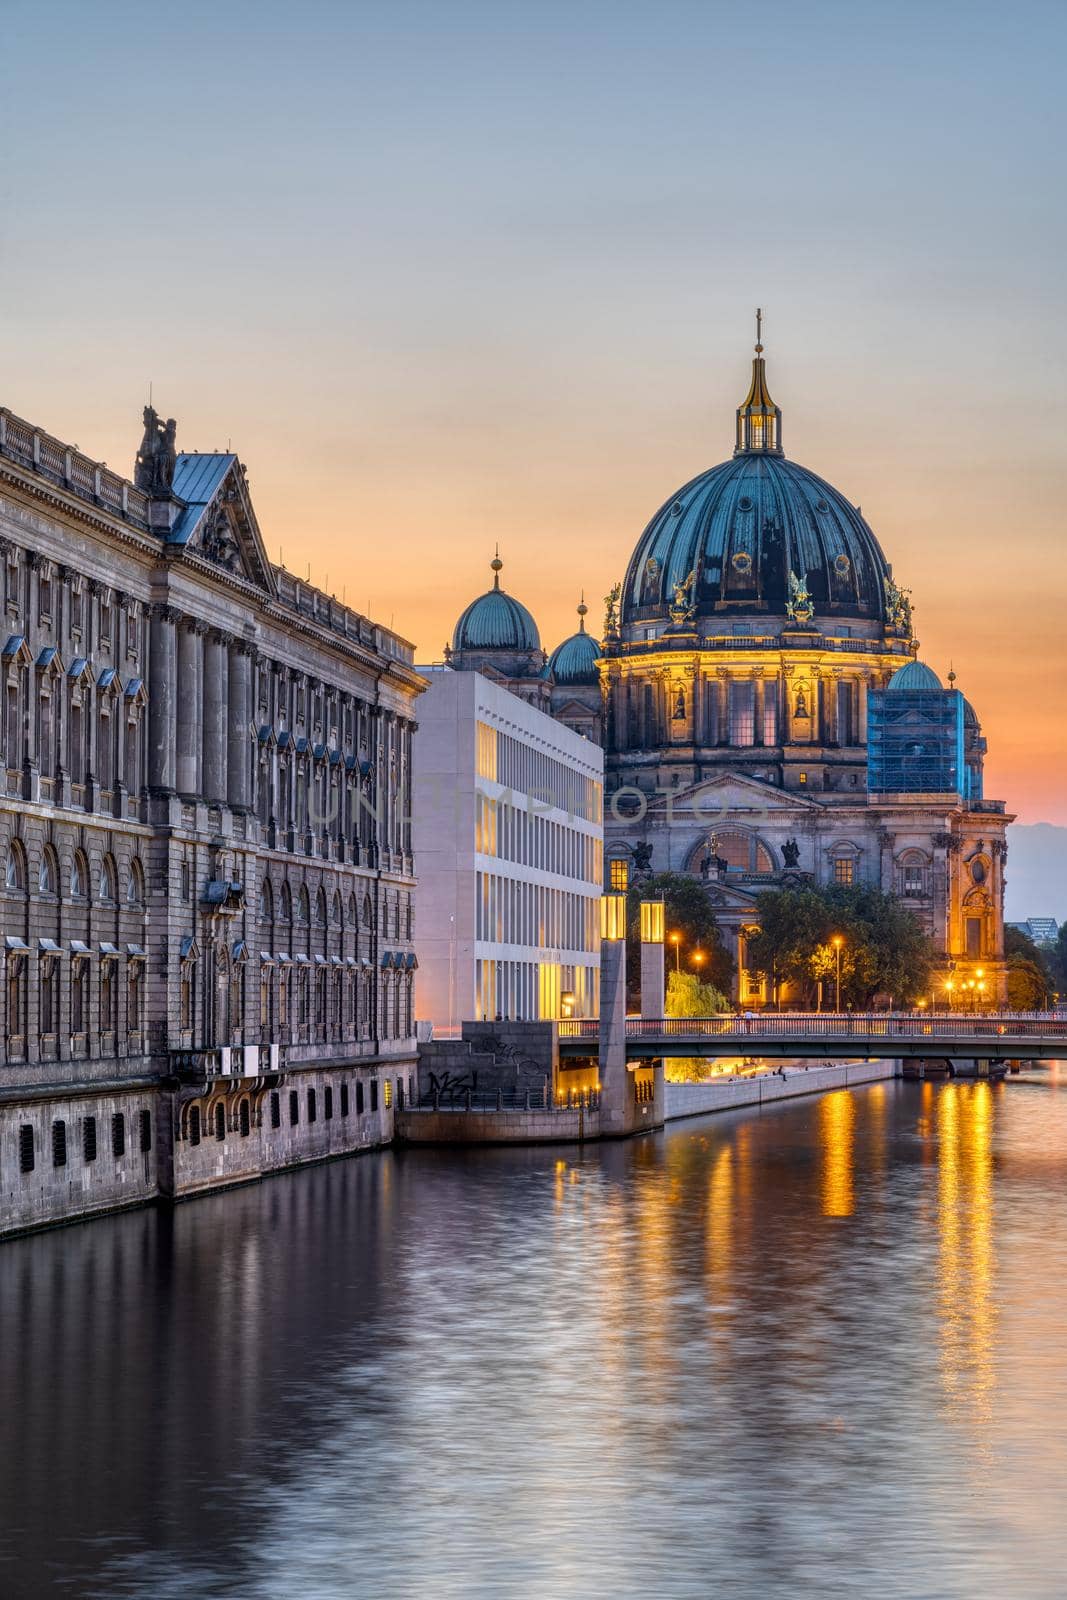 View along the River Spree in Berlin at dusk by elxeneize